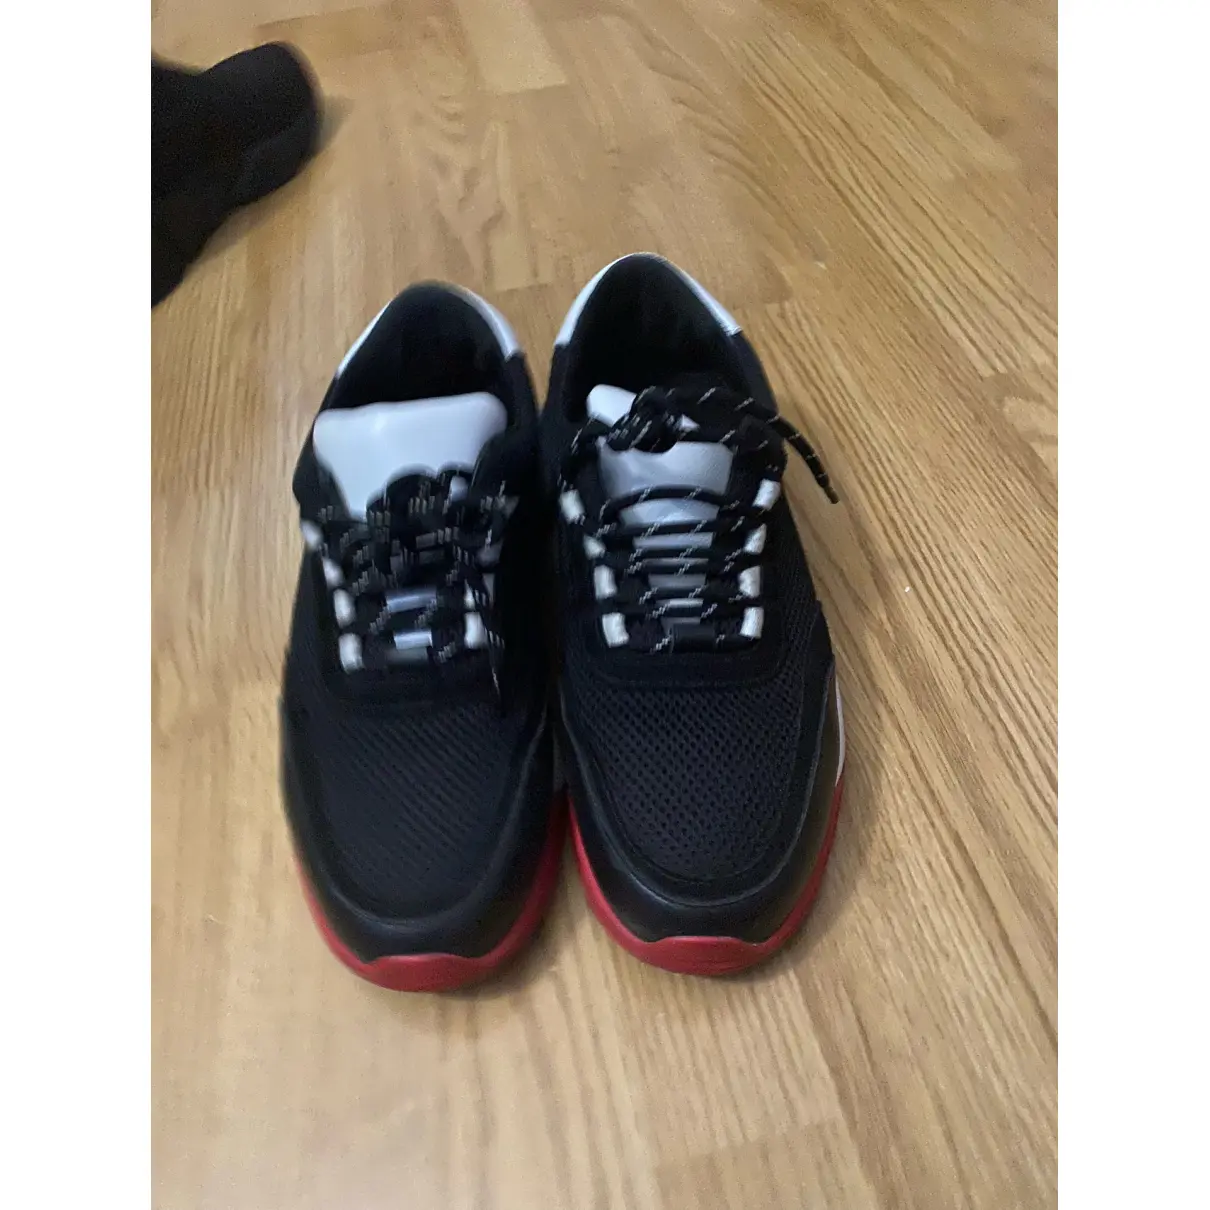 Buy Axel Arigato Leather low trainers online